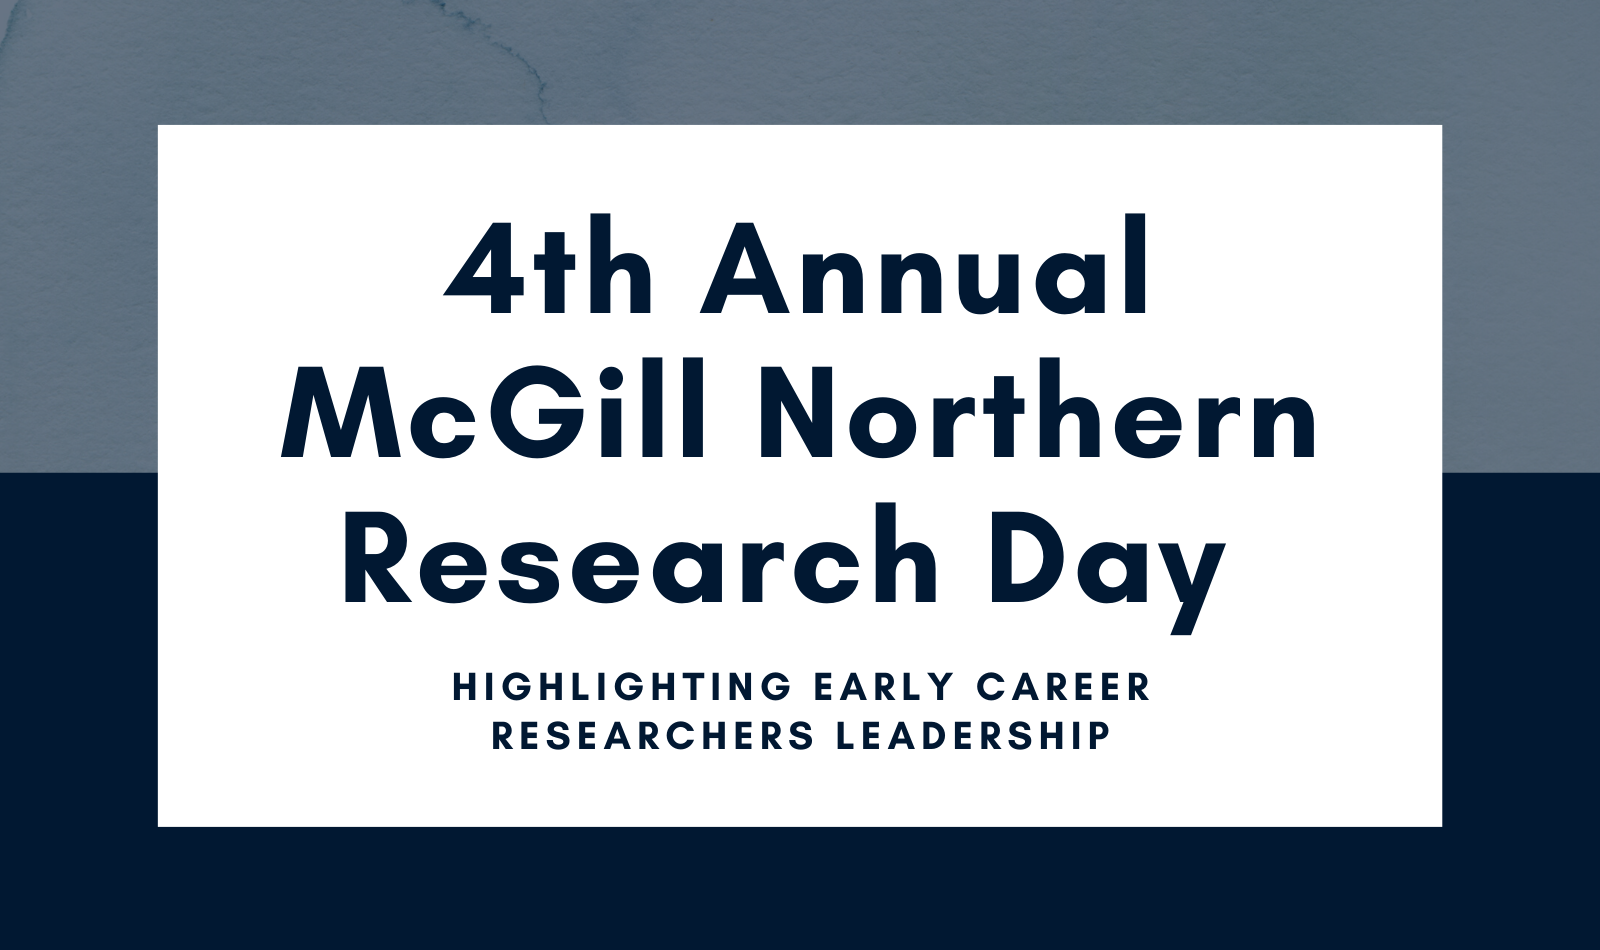 4th Annual McGill Northern Research Day; Highlighting Early Career Researchers Leadership